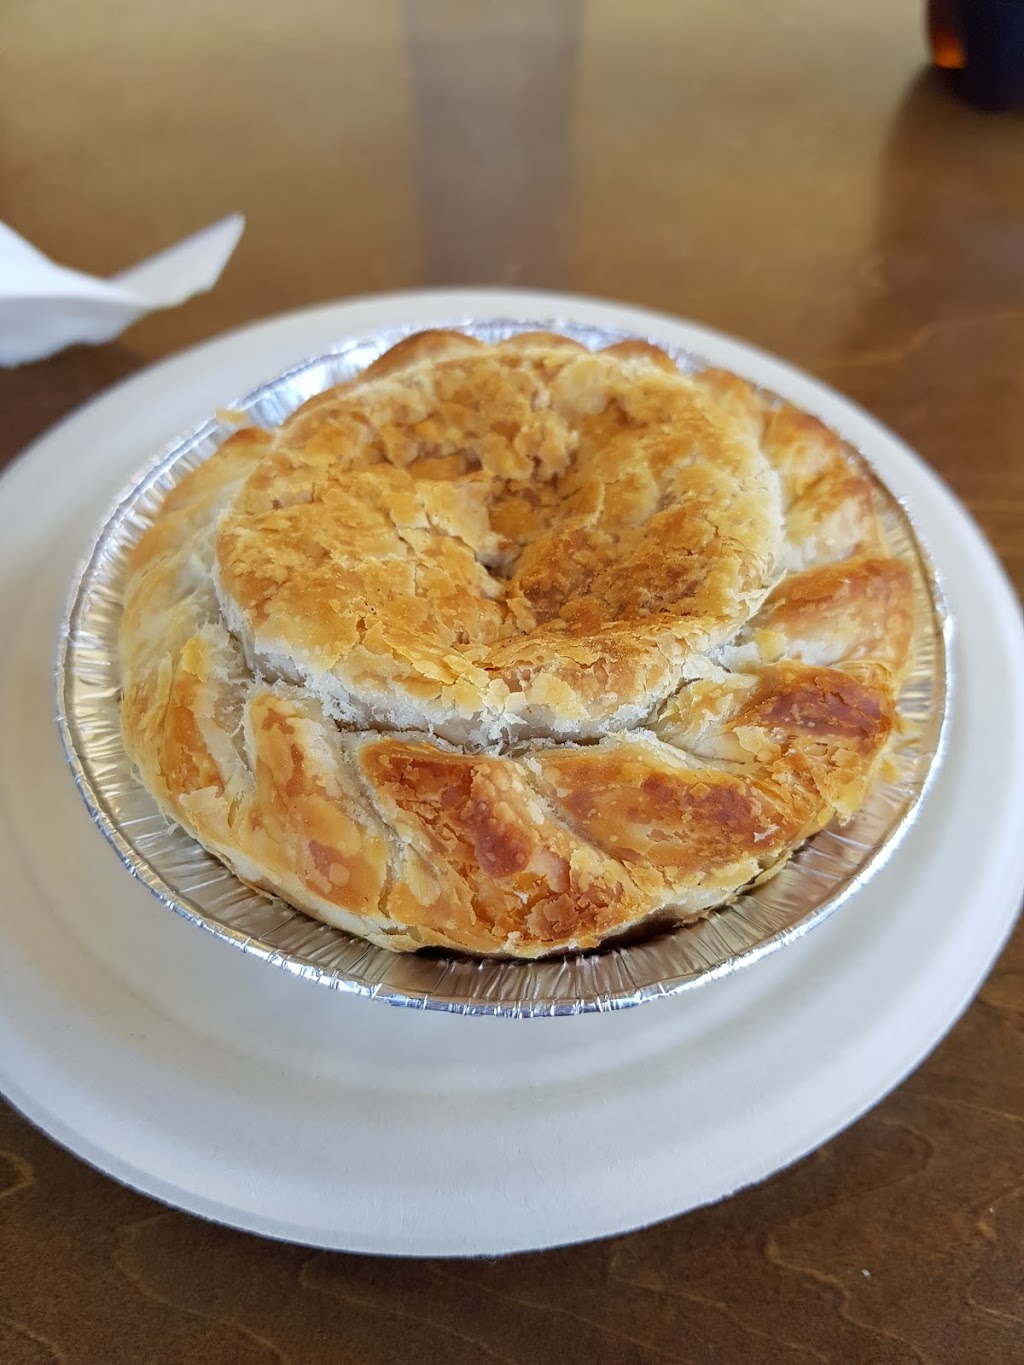 The Worlds Best Pies Cafe | cafe | 2167 Moss Vale Rd, Barrengarry NSW 2577, Australia | 0244651360 OR +61 2 4465 1360